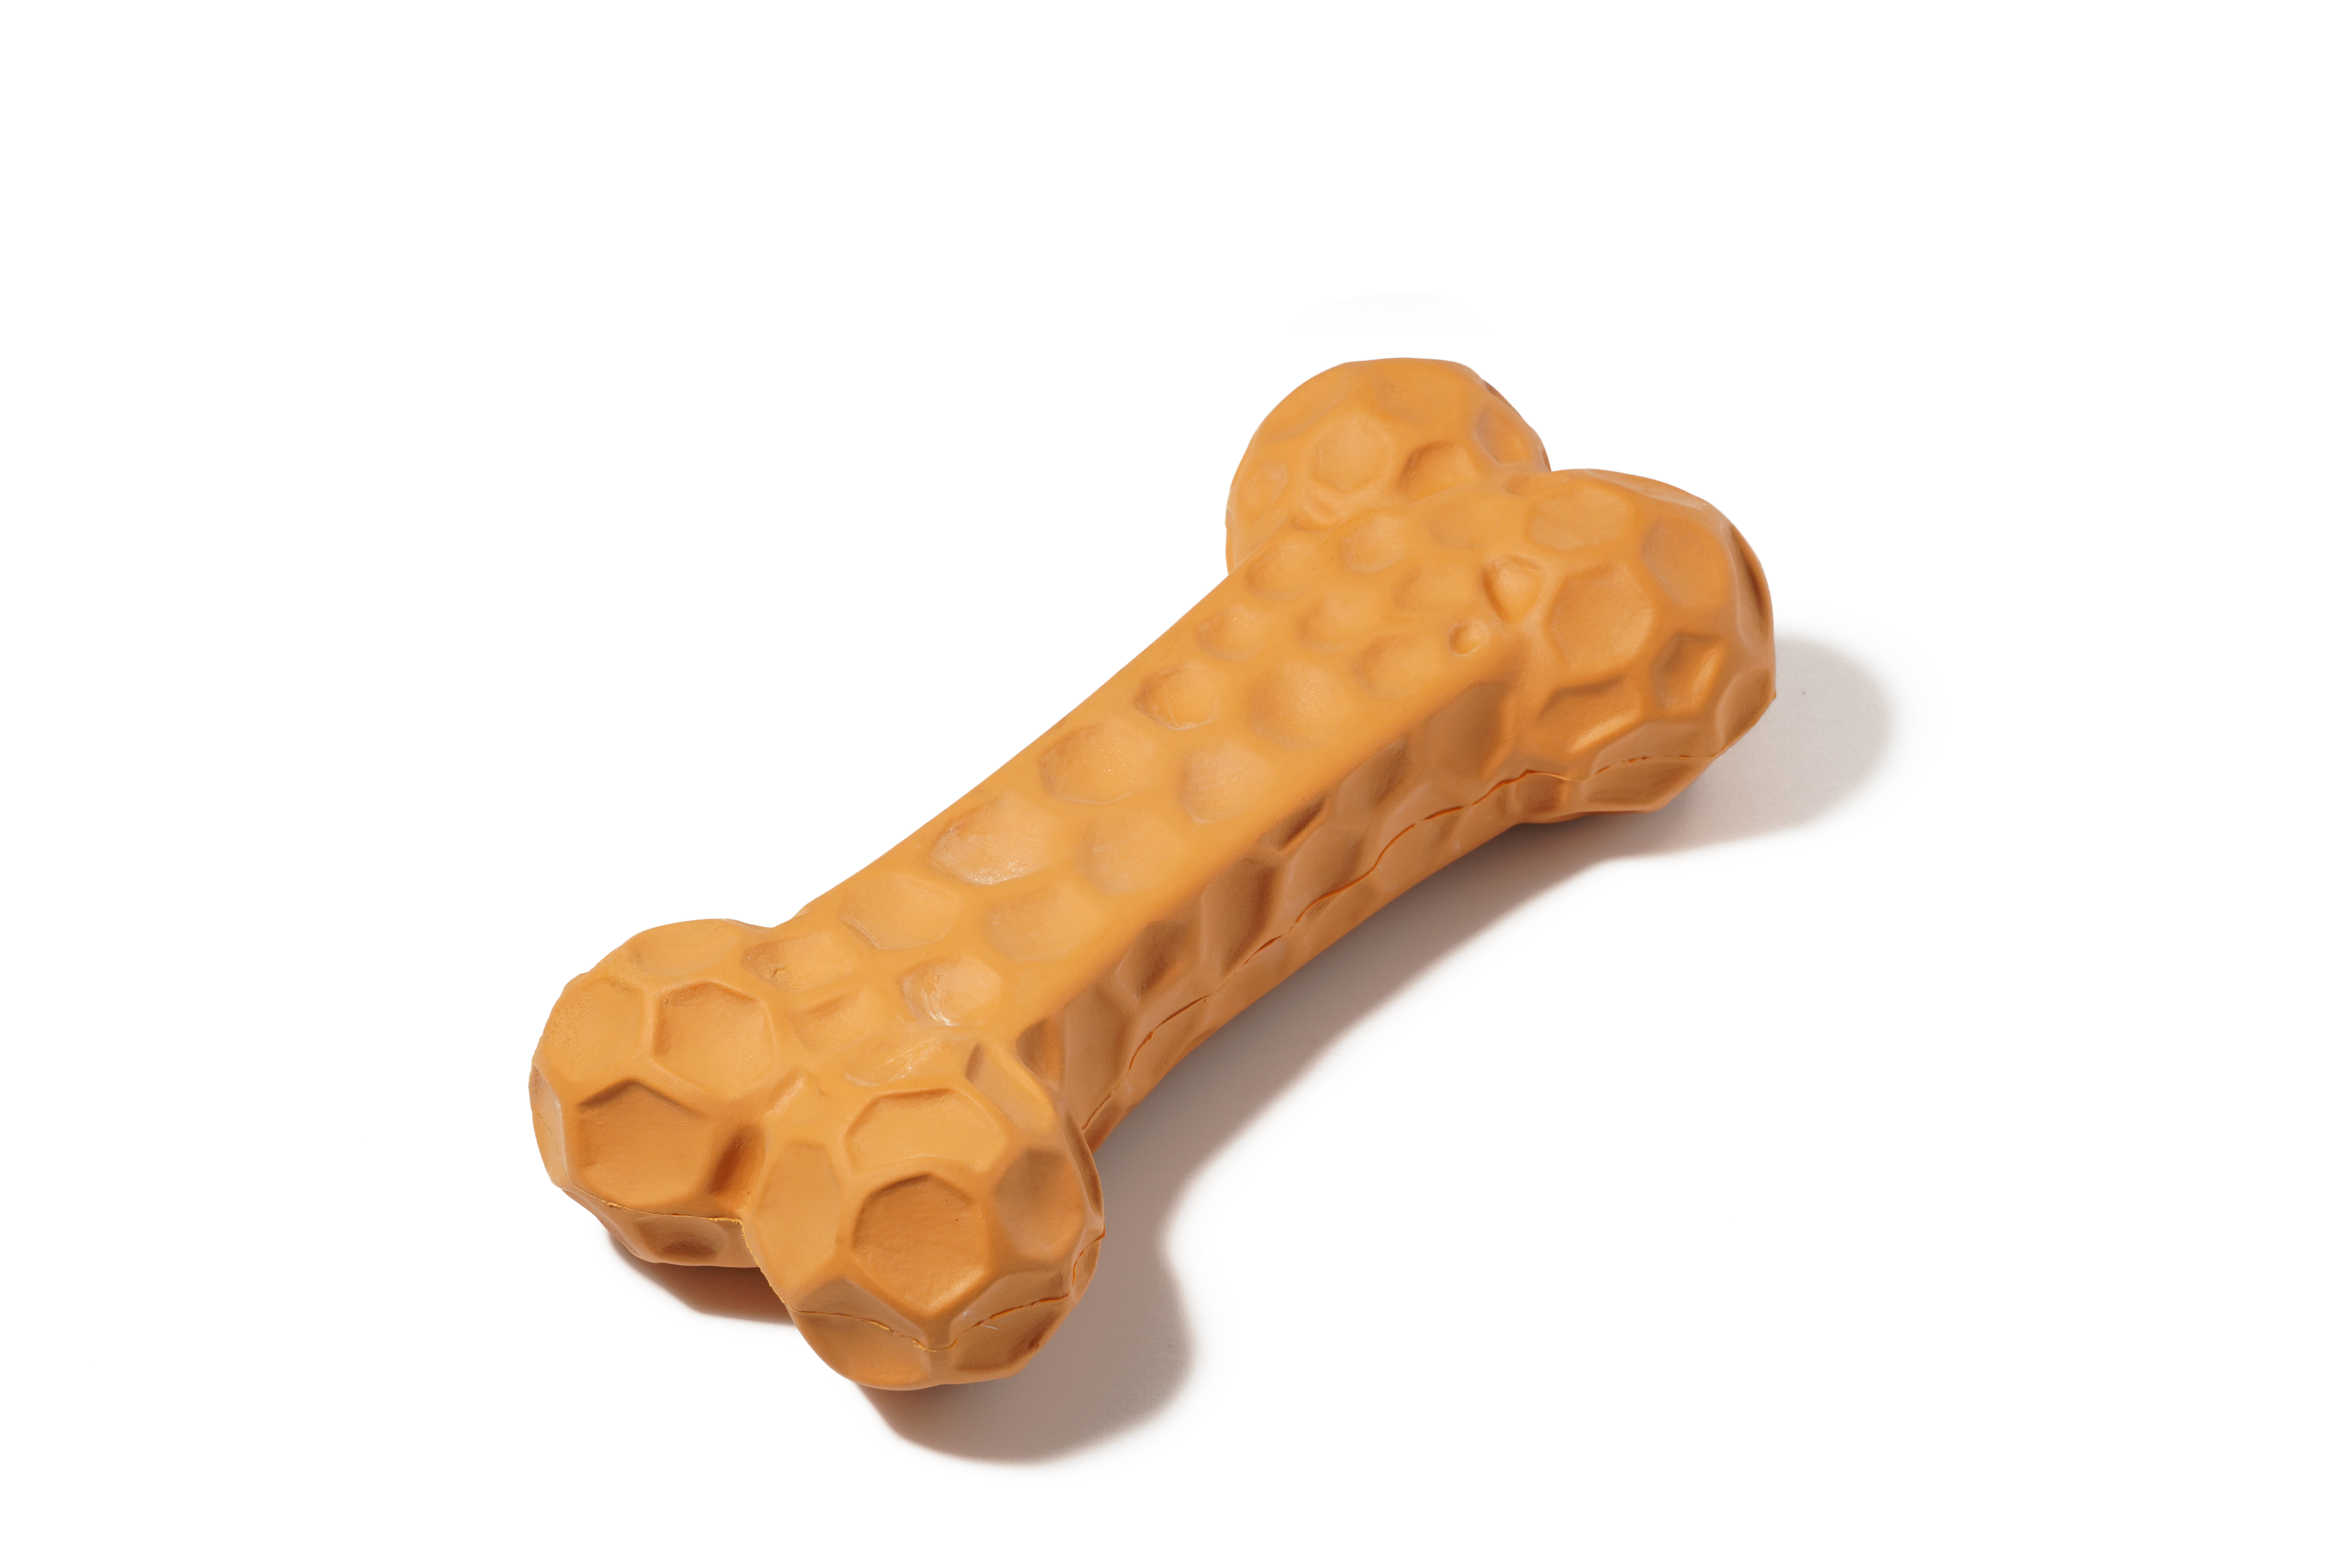 rubber dog toy